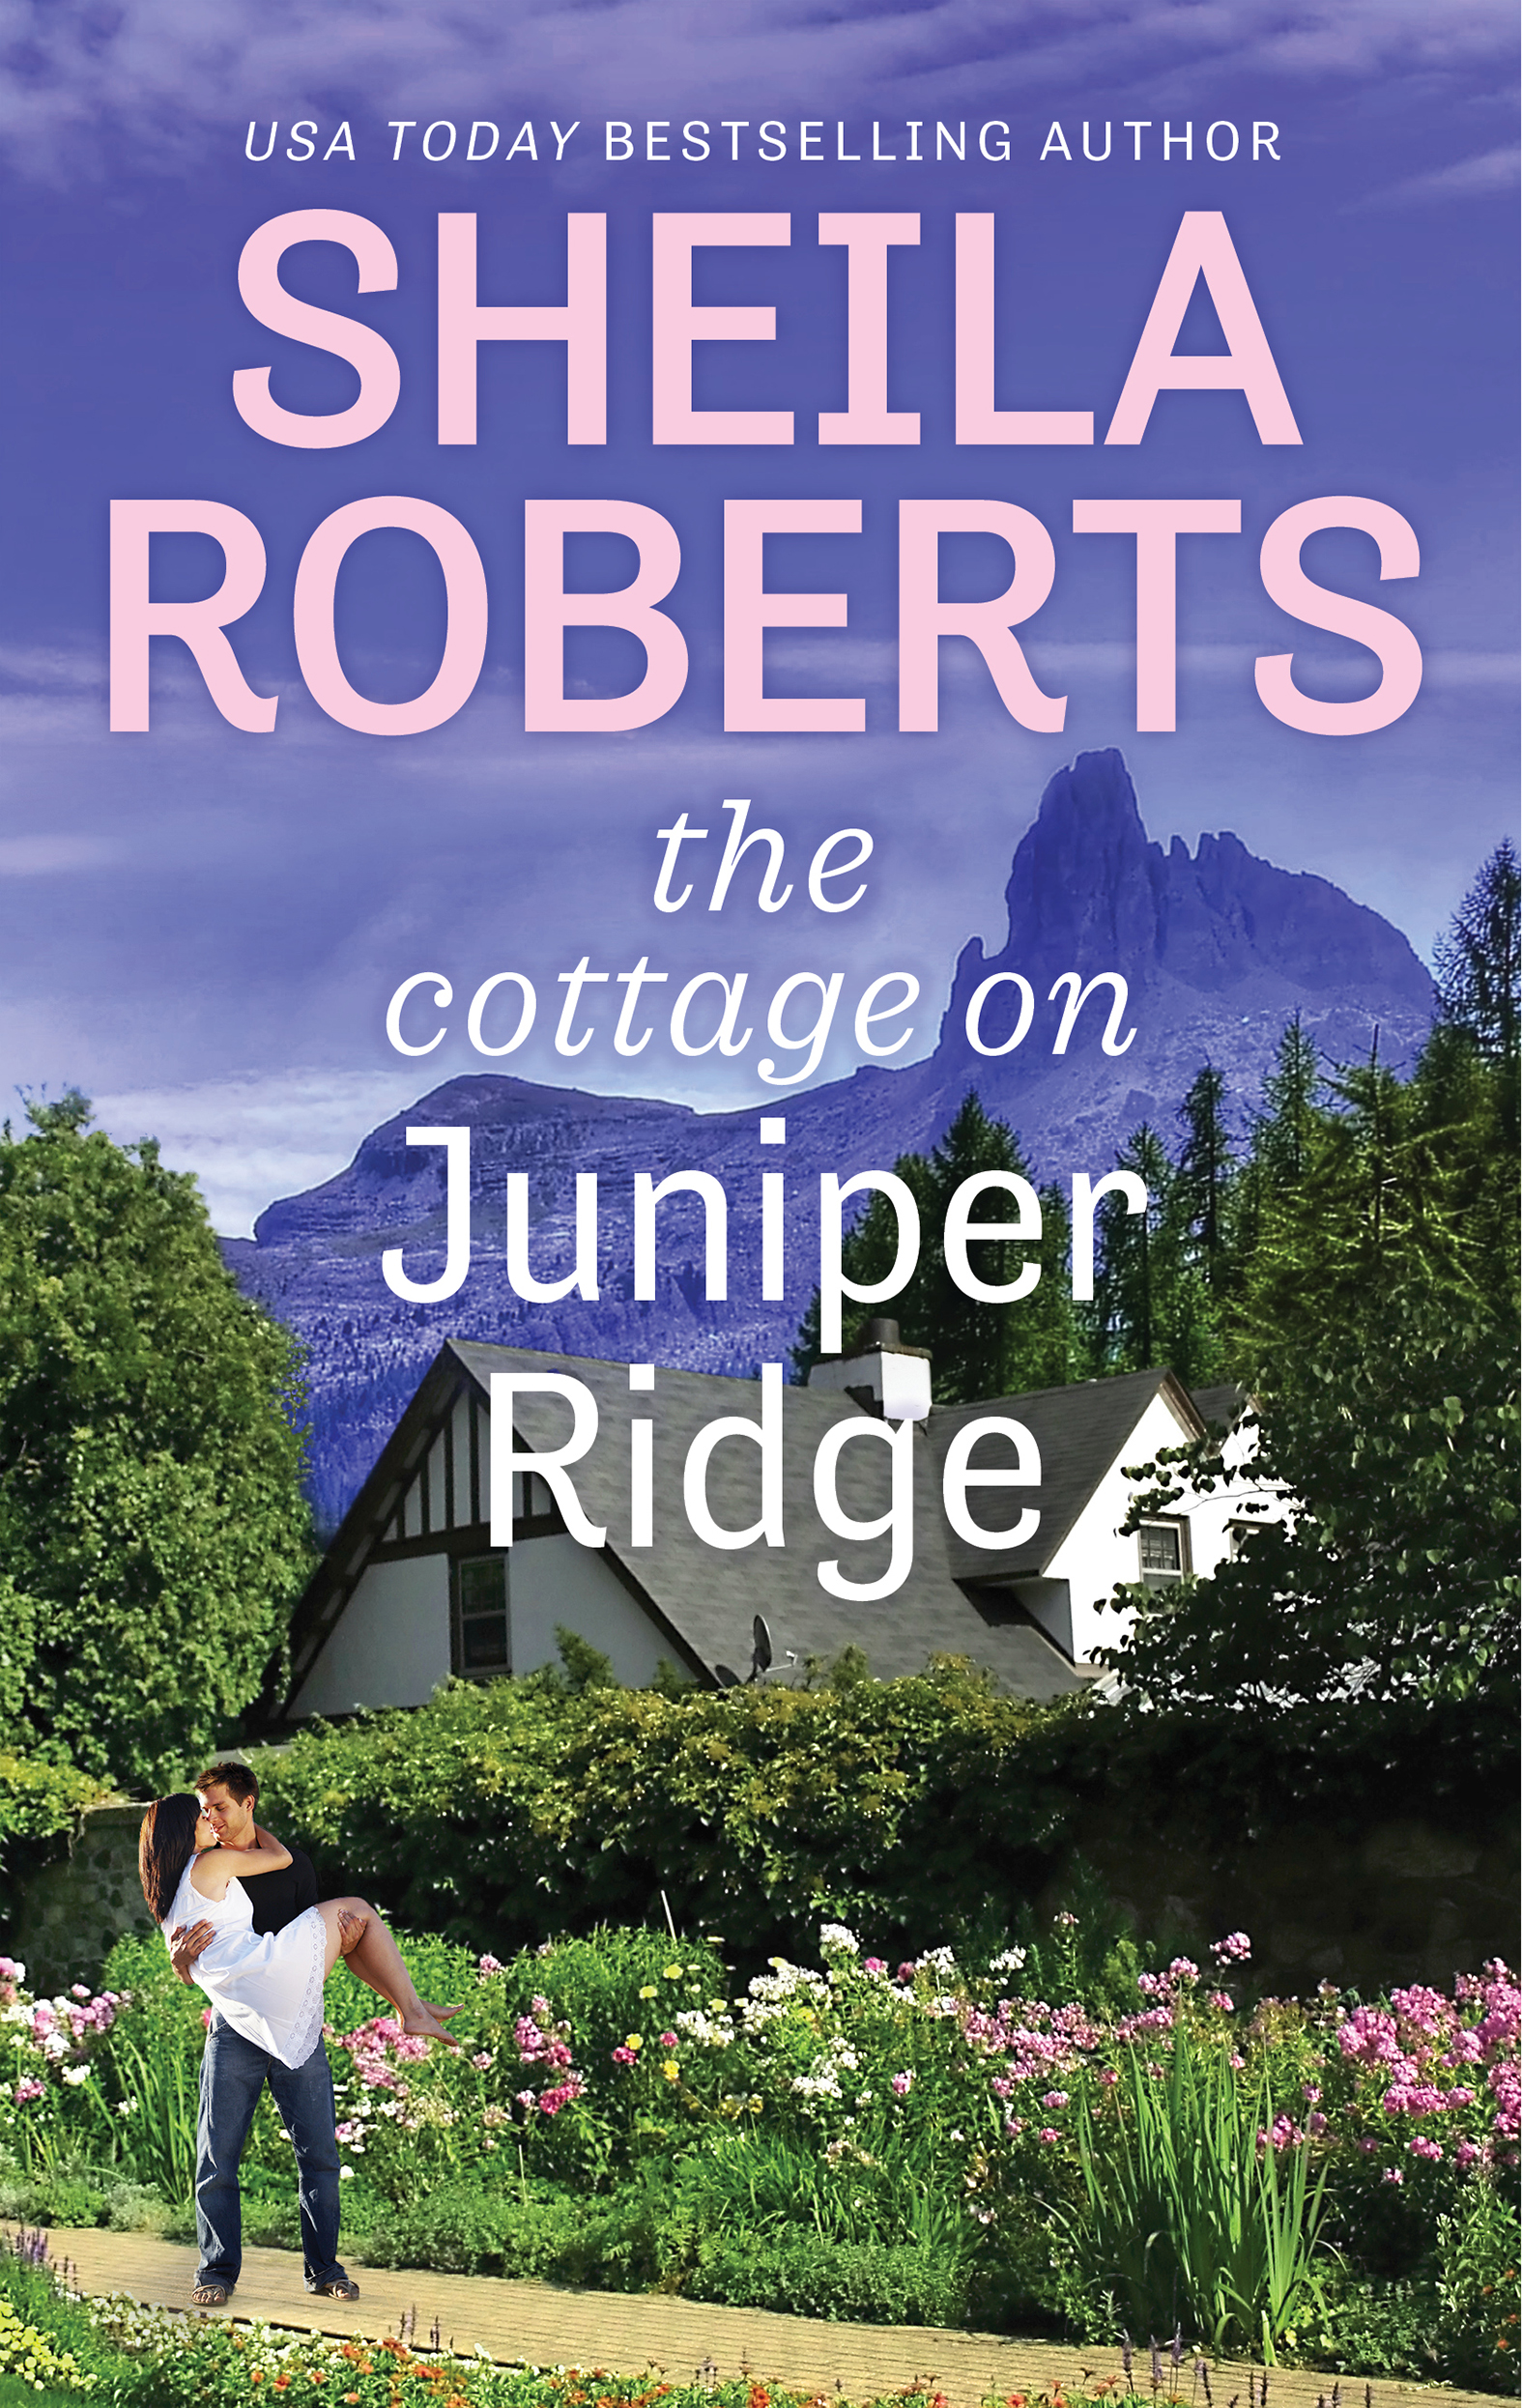 Cover Image of The Cottage on Juniper Ridge